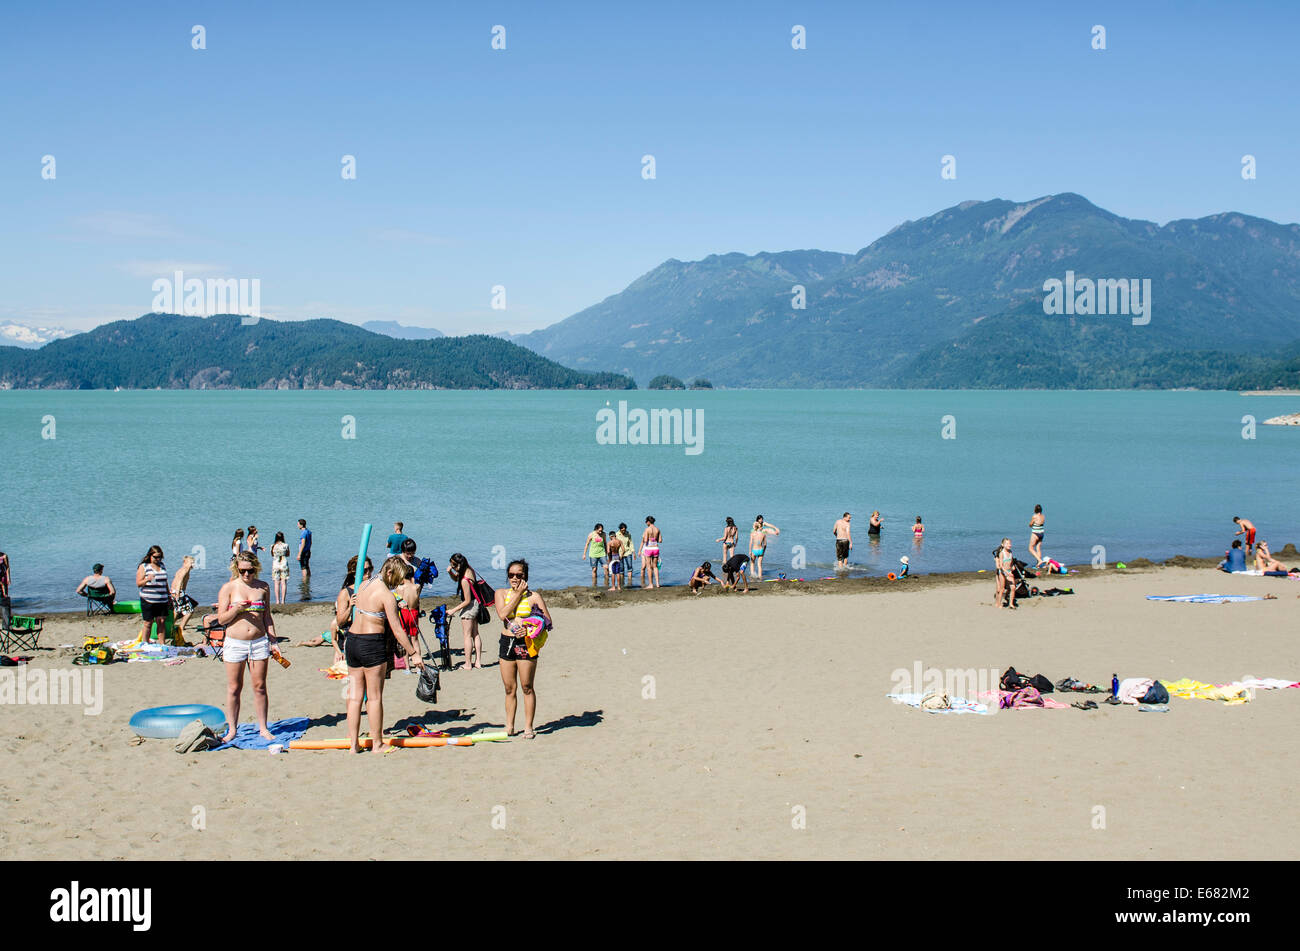 Vacationers people family on beach at Harrison Lake, Harrison Hot Springs resort, British Columbia, Canada. Stock Photo